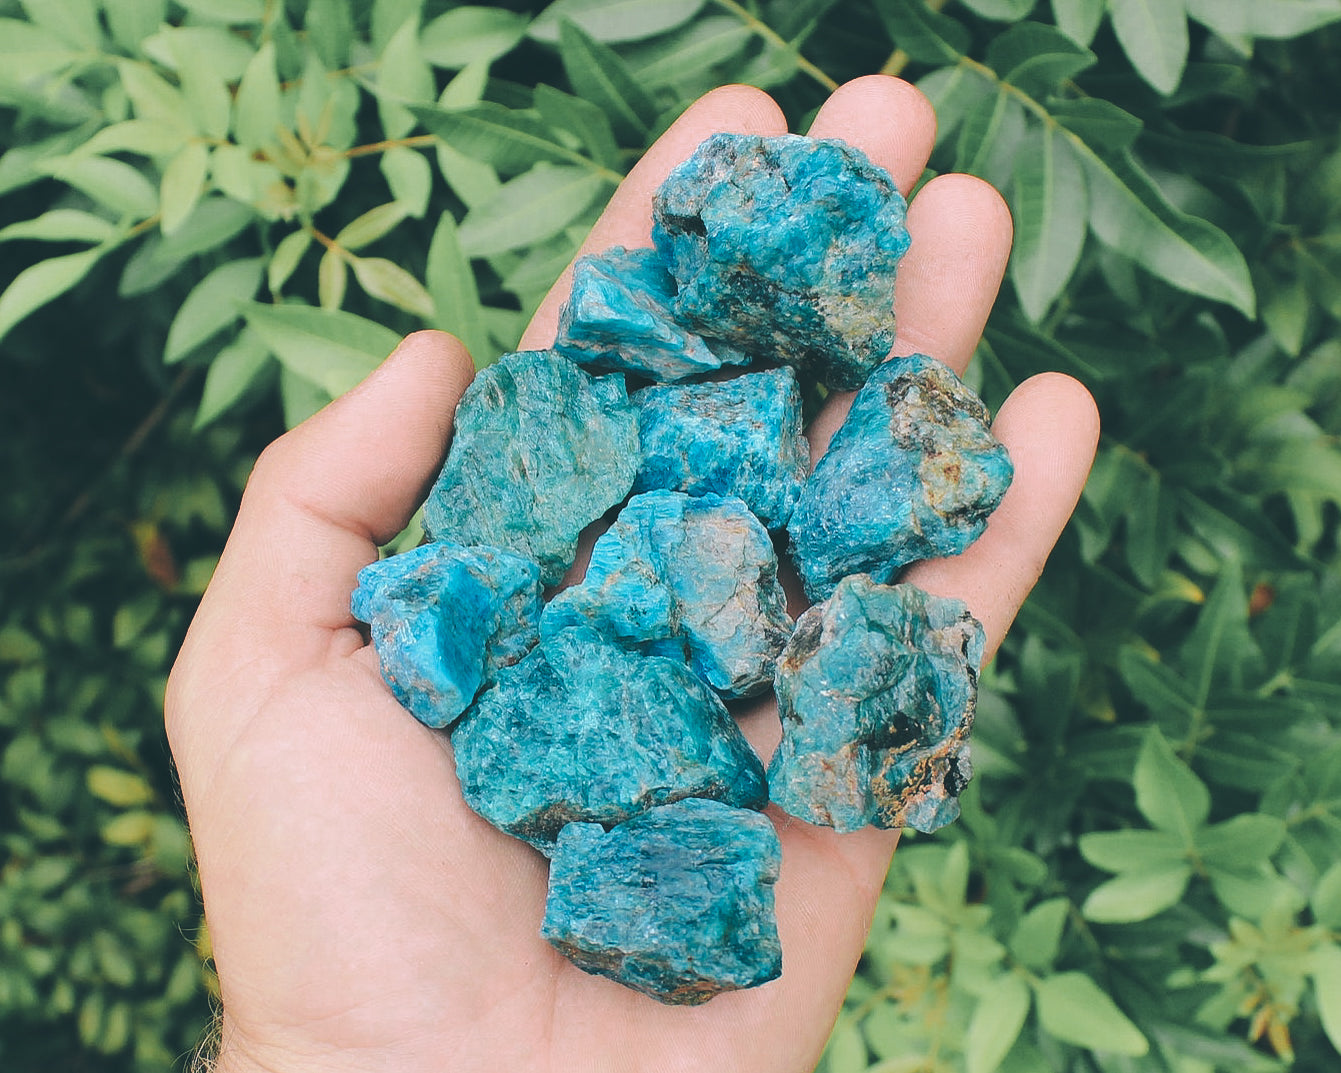 Blue Apatite Crystal Chunk - Time's Reel